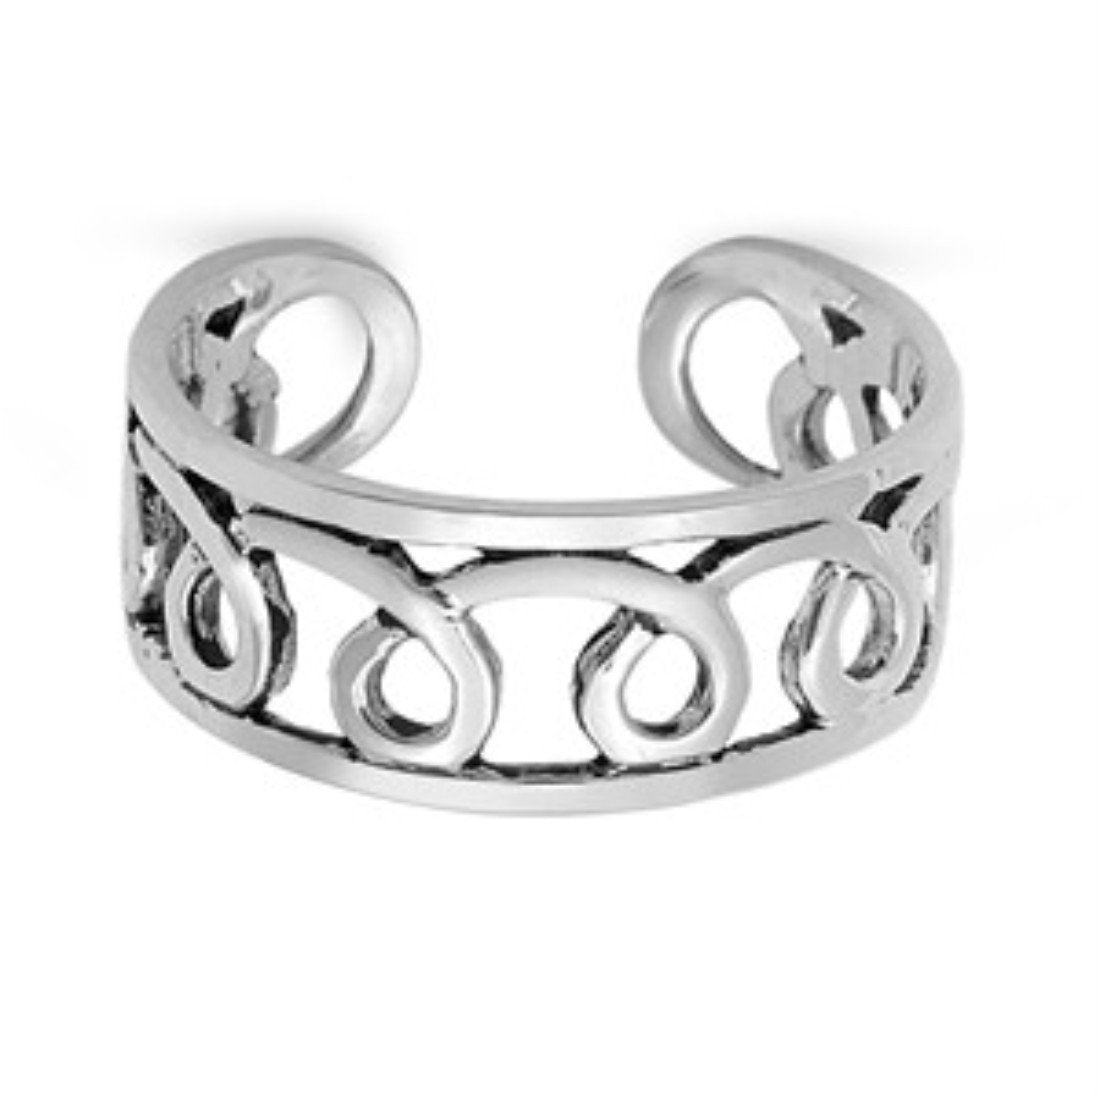 Silver Toe Ring Adjustable Band 925 Sterling Silver (6mm)